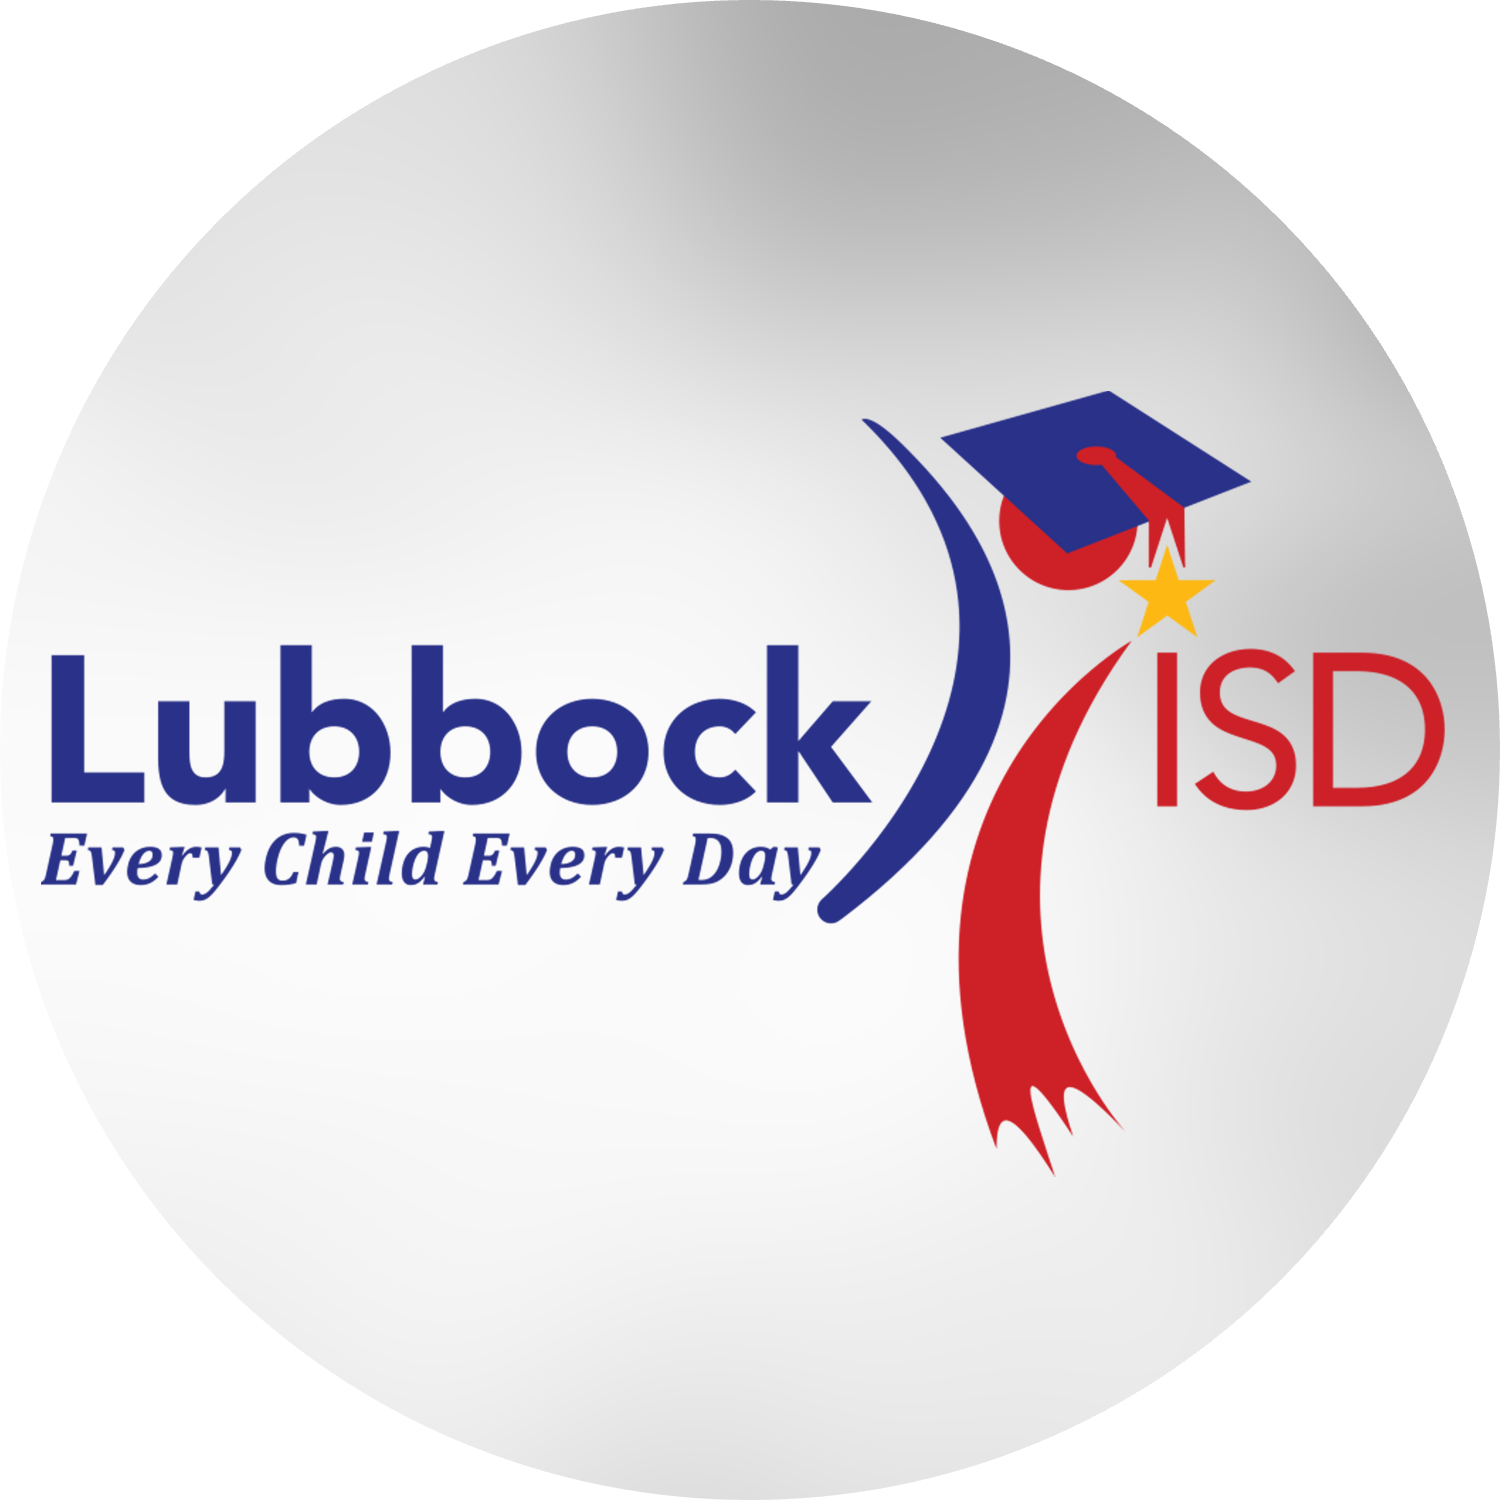 Lubbock ISD Every Child Every Day